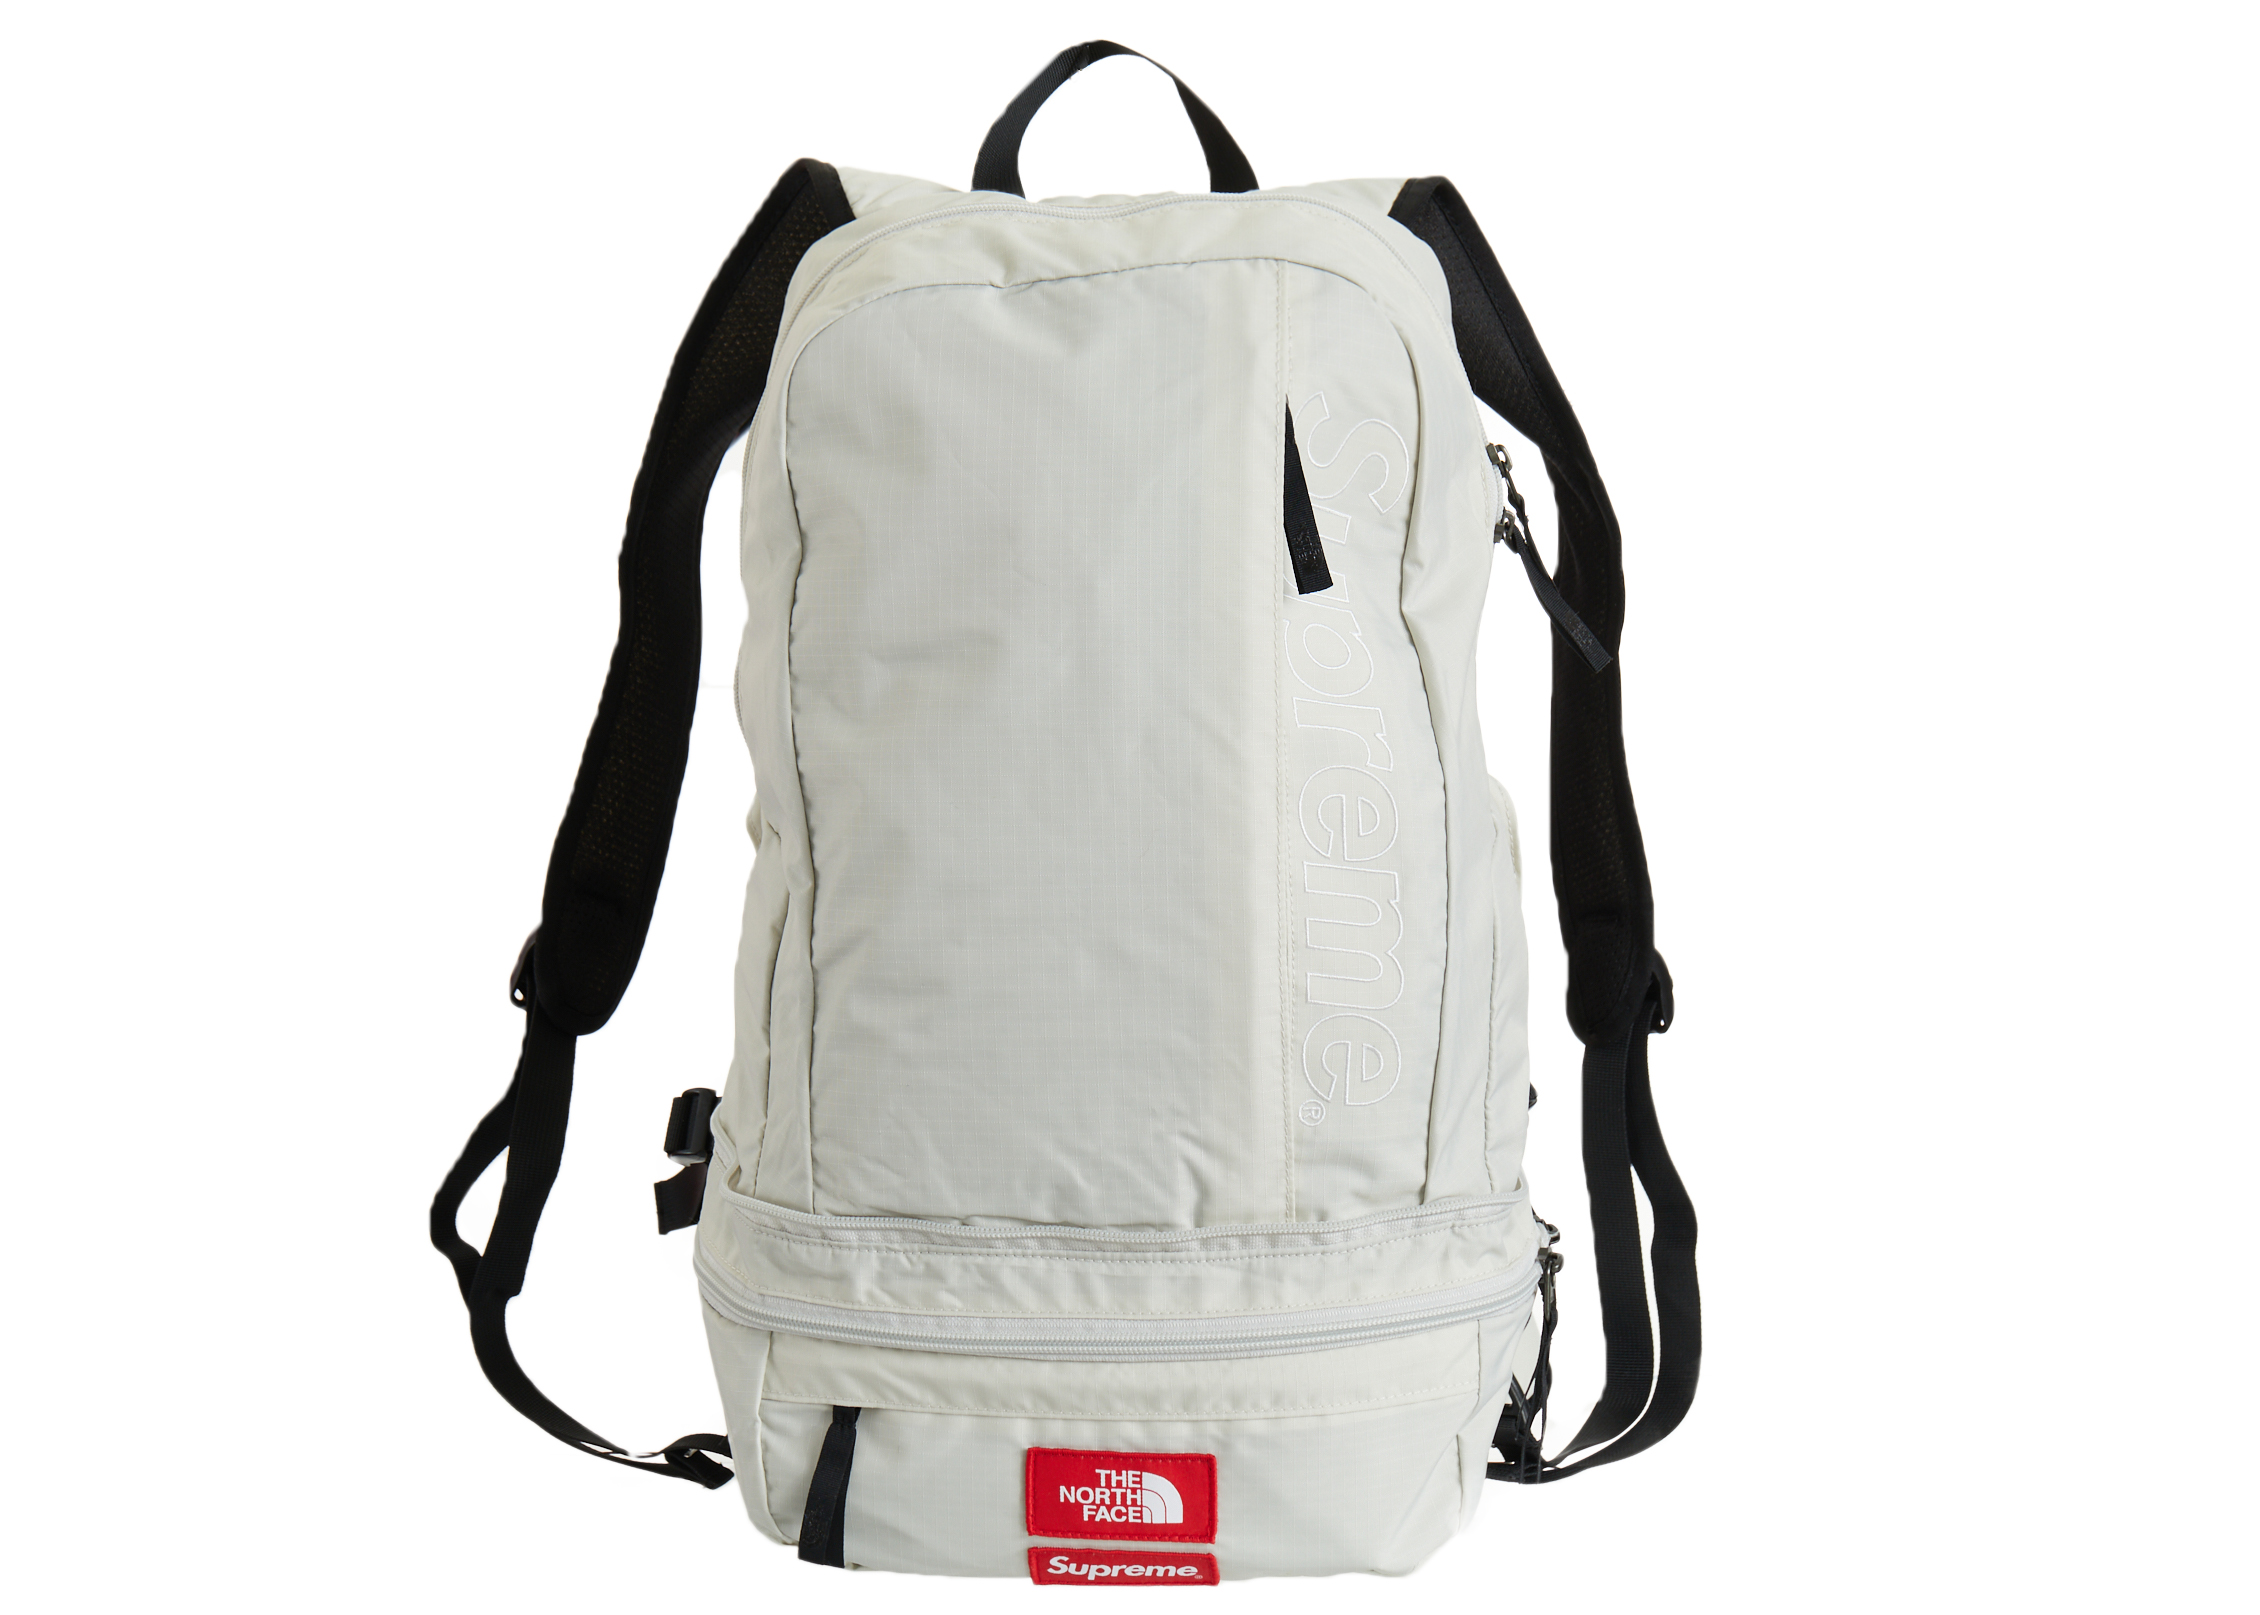 supreme north face backpack 白 ホワイト 新品